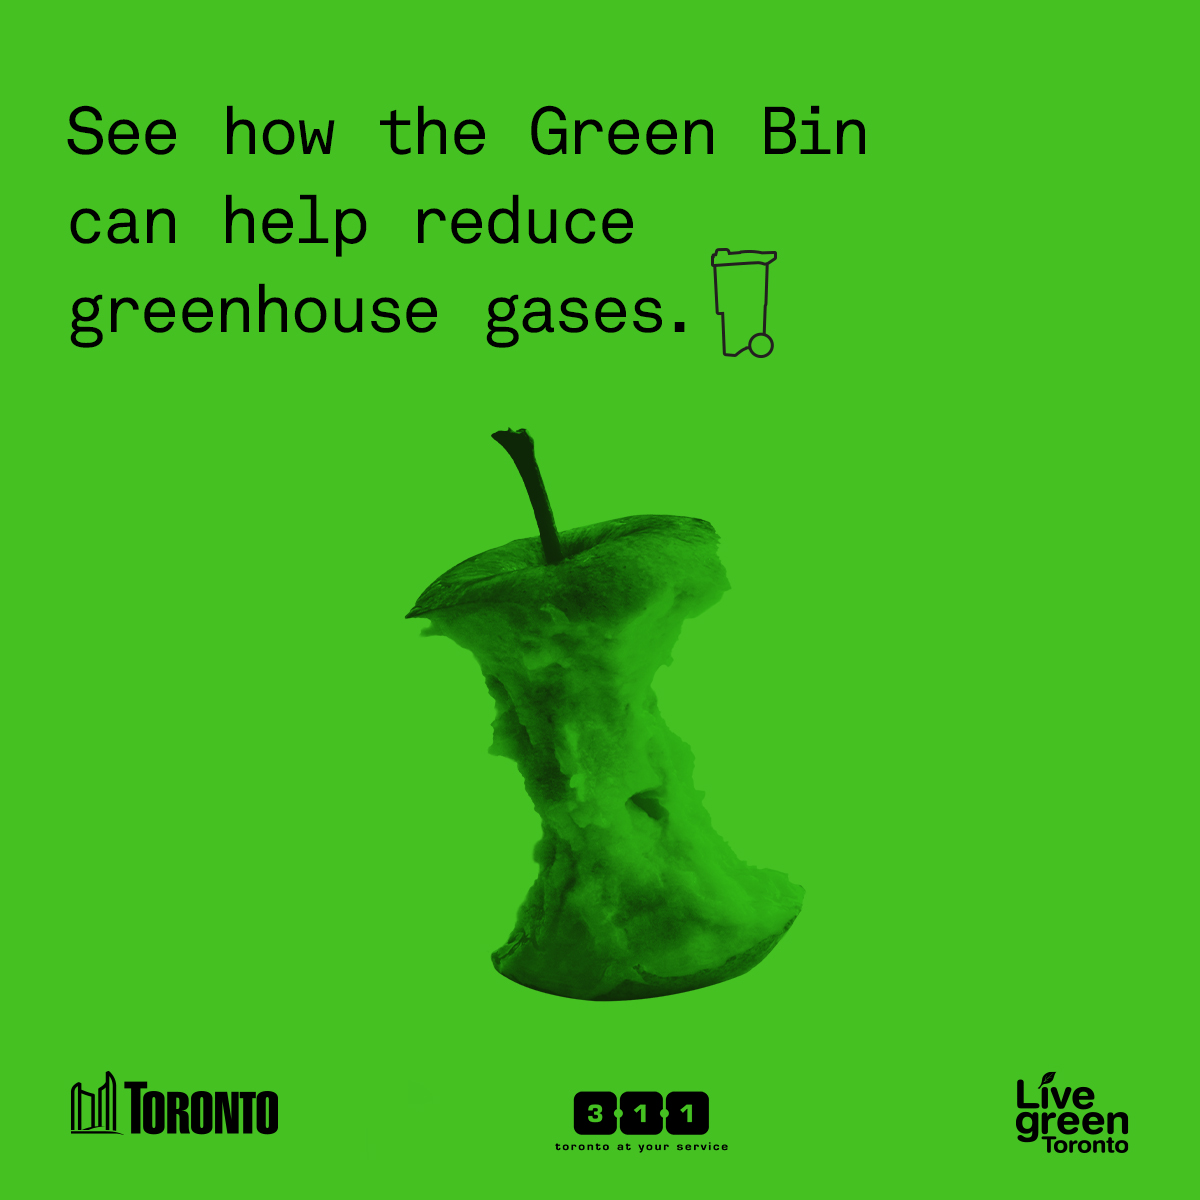 Did you know that putting food scraps in the Green Bin helps to create renewable natural gas? All food waste, whether fresh, frozen, dried, prepared, cooked or spoiled, can be placed in the Green Bin. For more info, visit: toronto.ca/greenbin